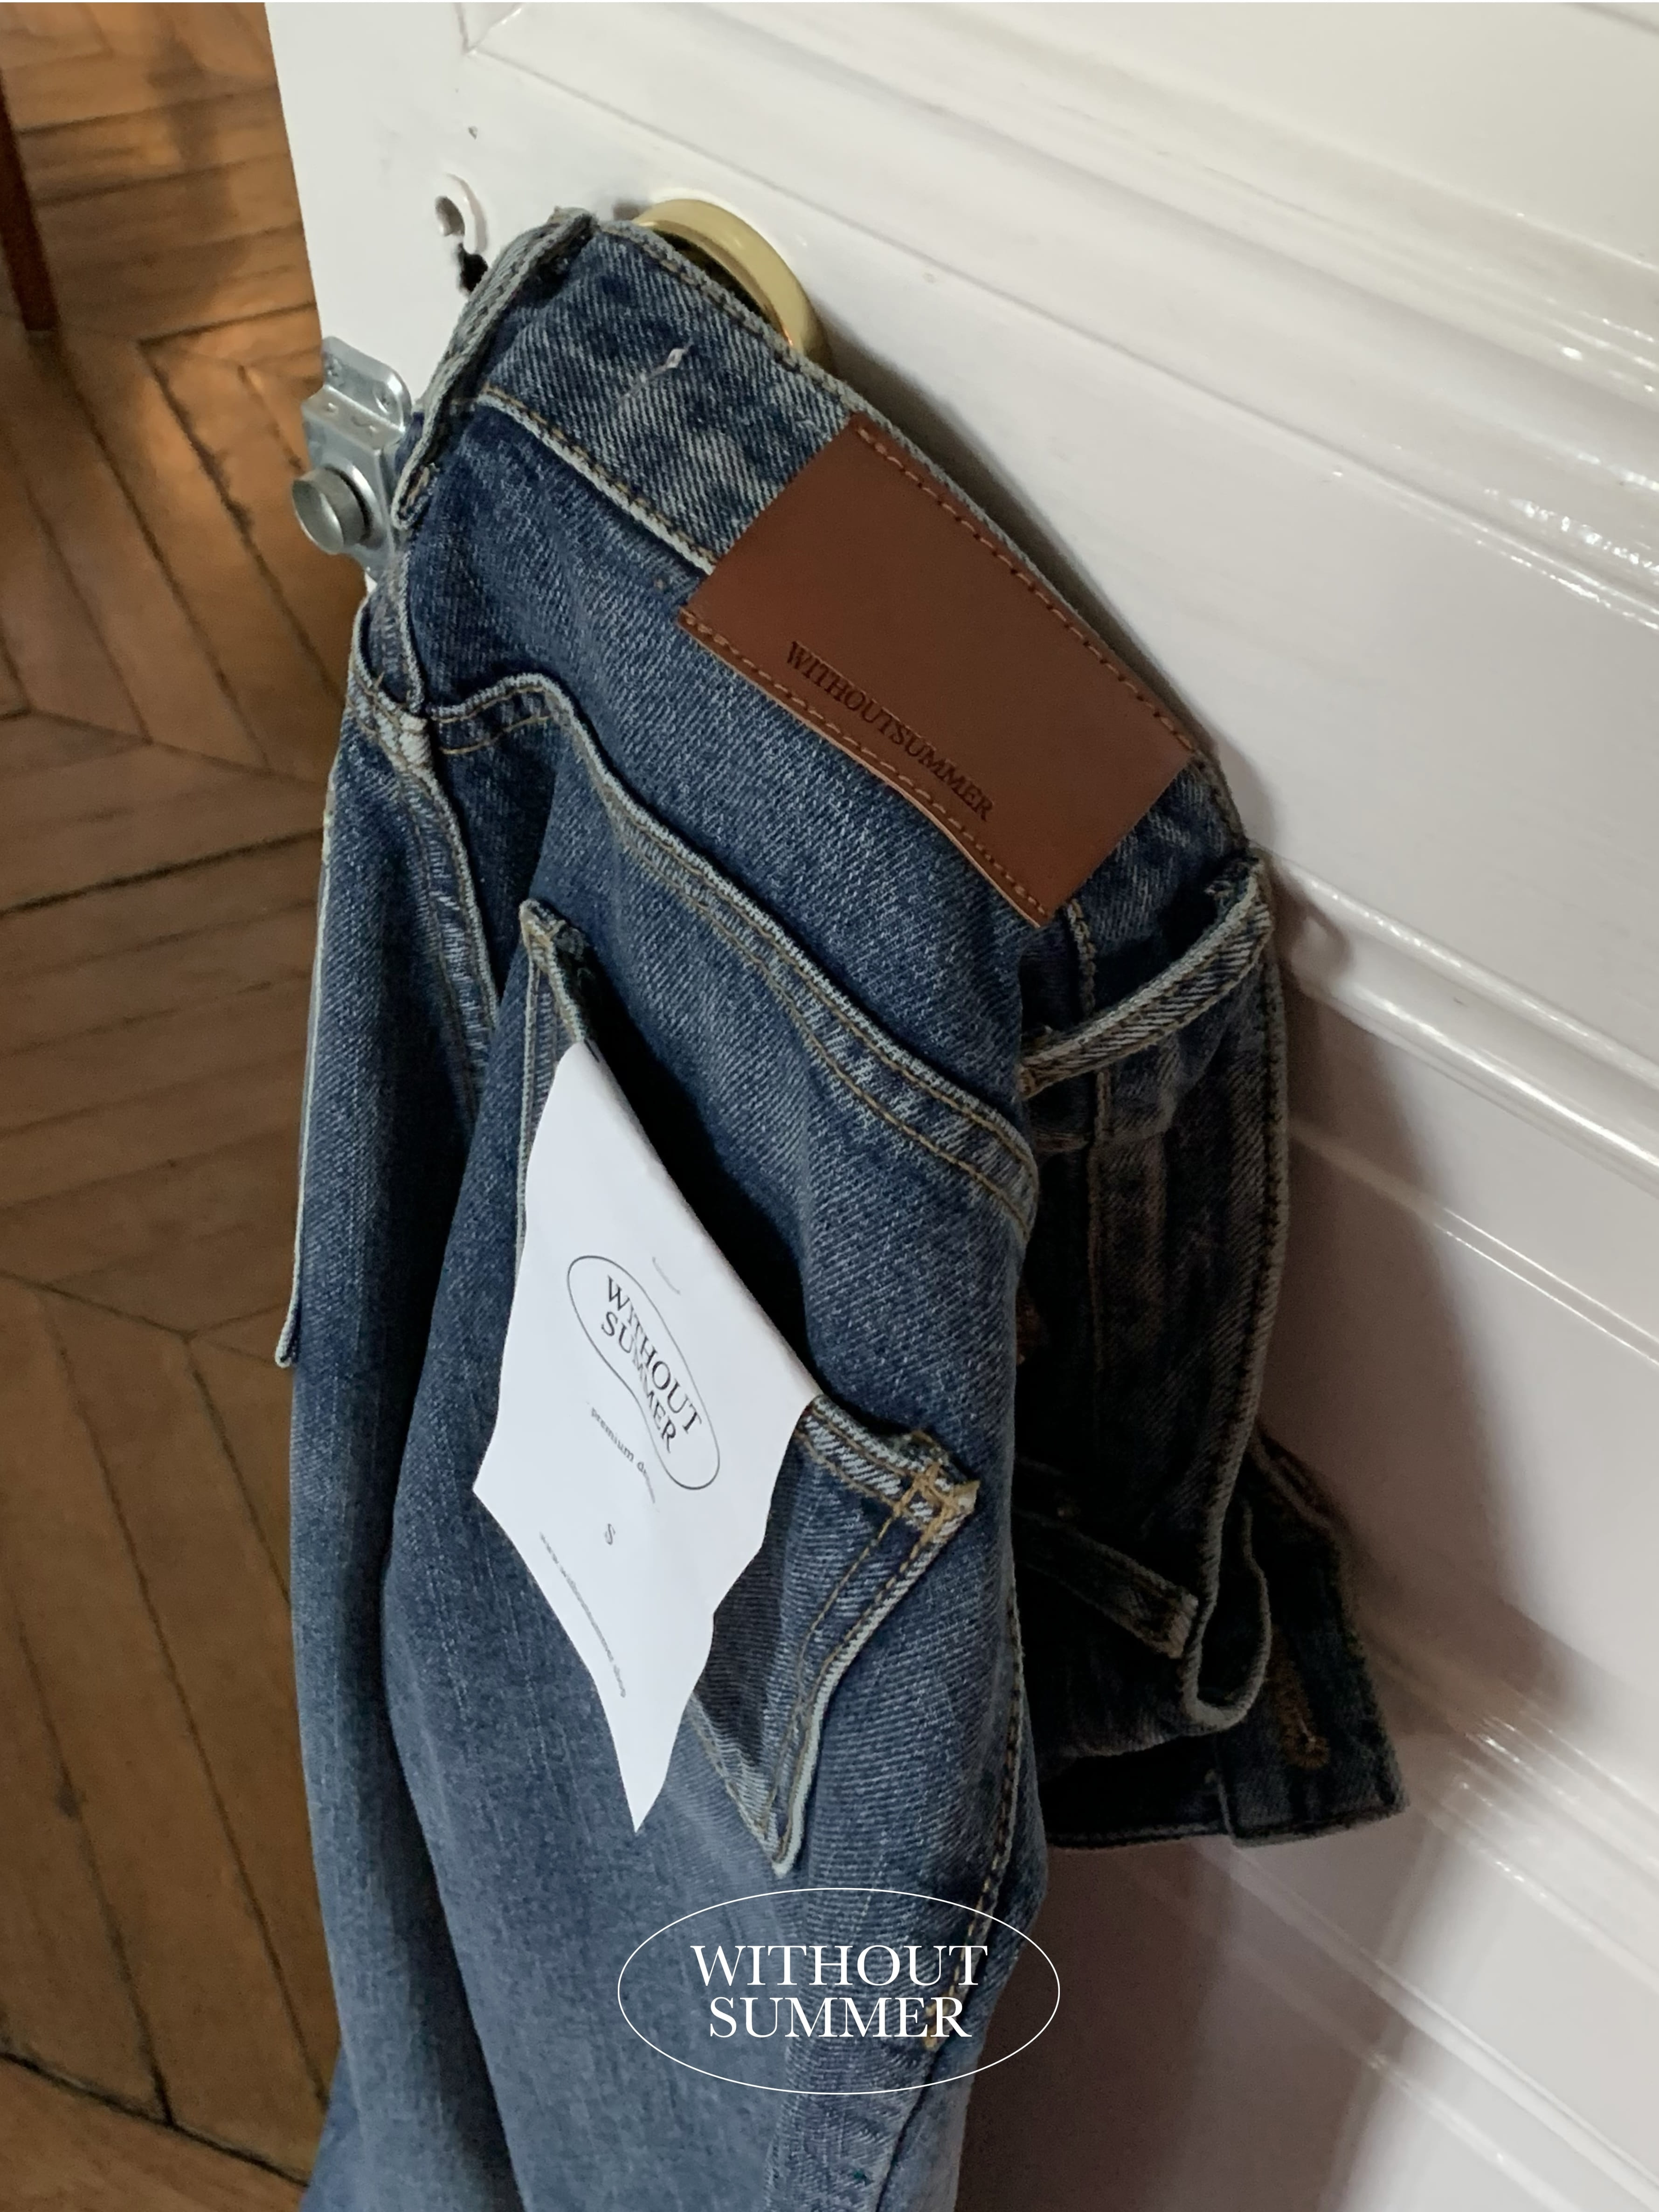 [withoutsummer] grain denim pants (limited)